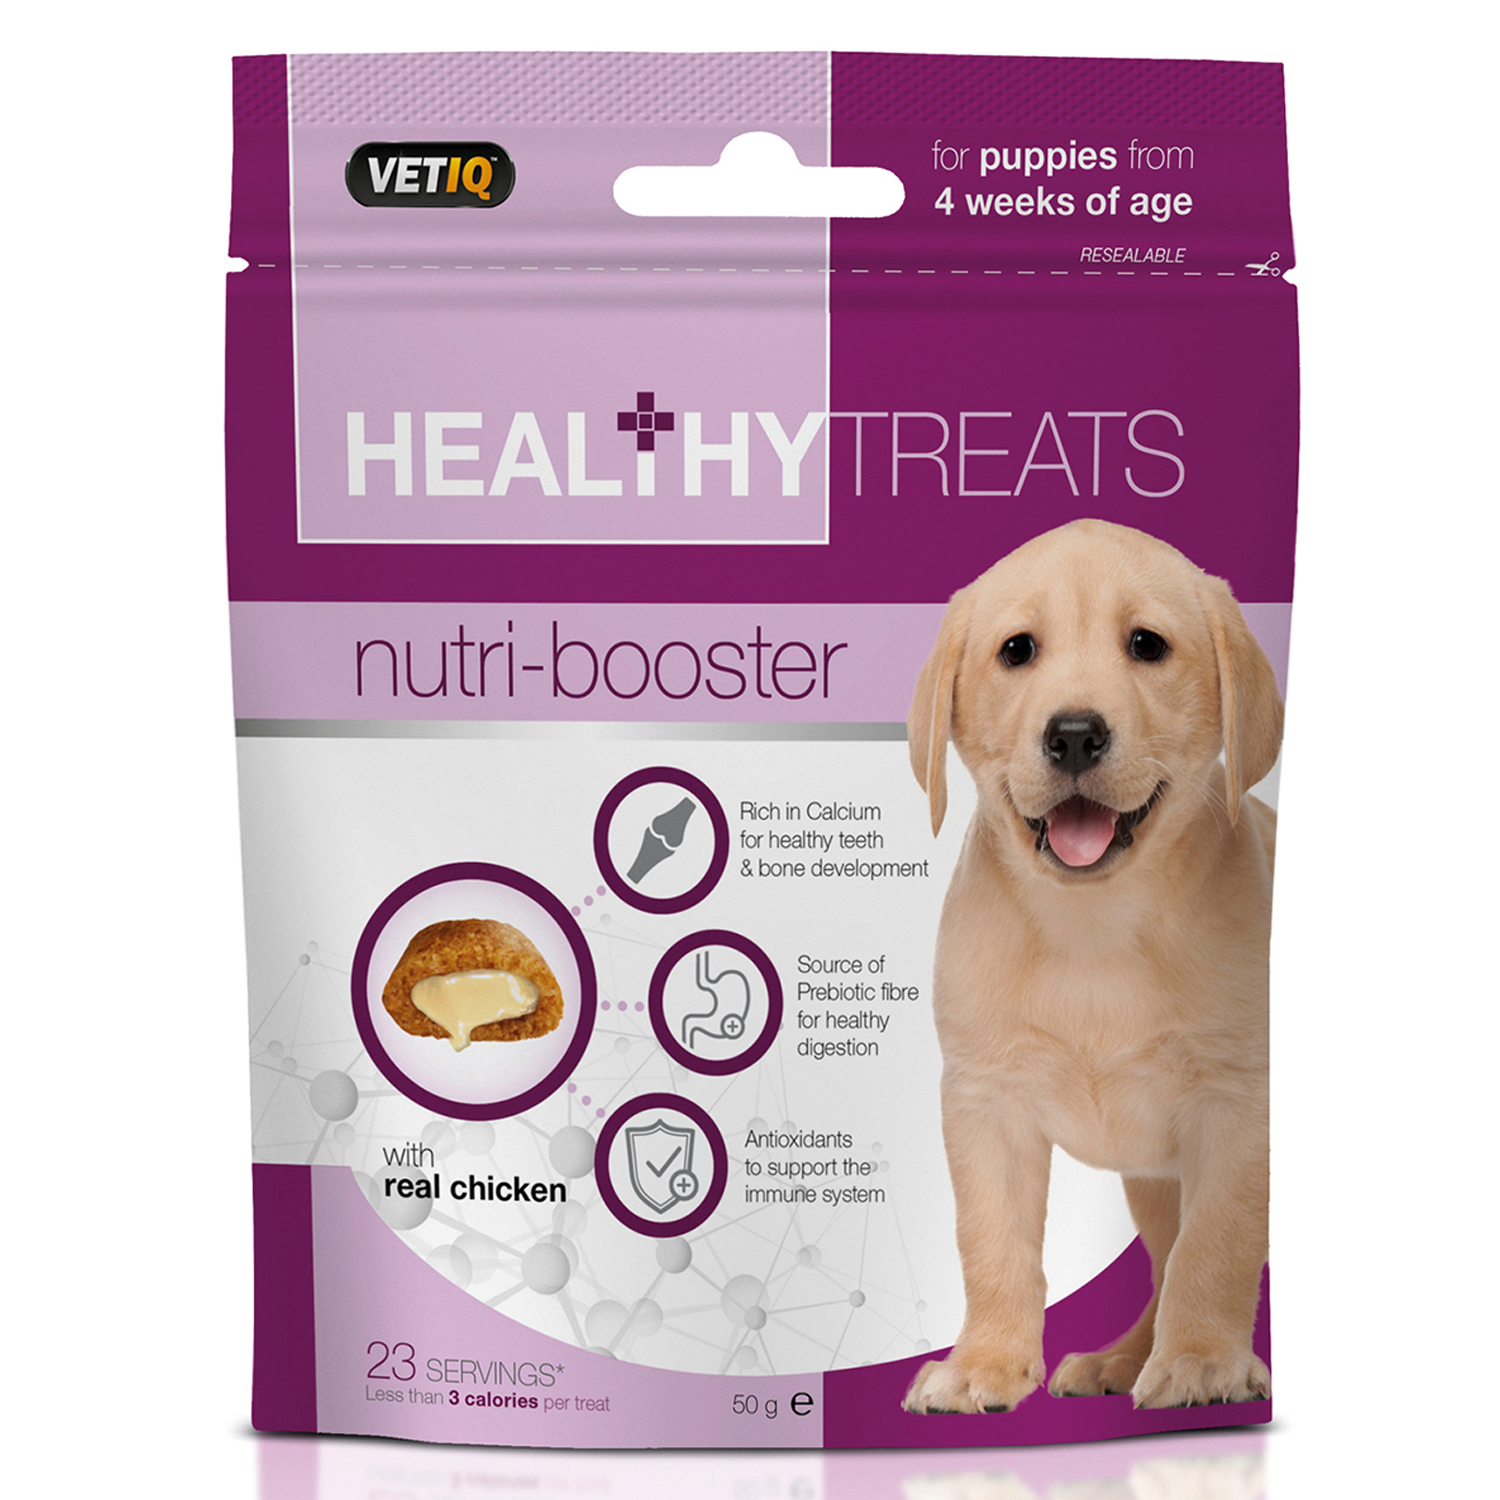 VETIQ HEALTHY TREATS NUTRI-BOOSTER FOR PUPPIES 50 GM 50 GM